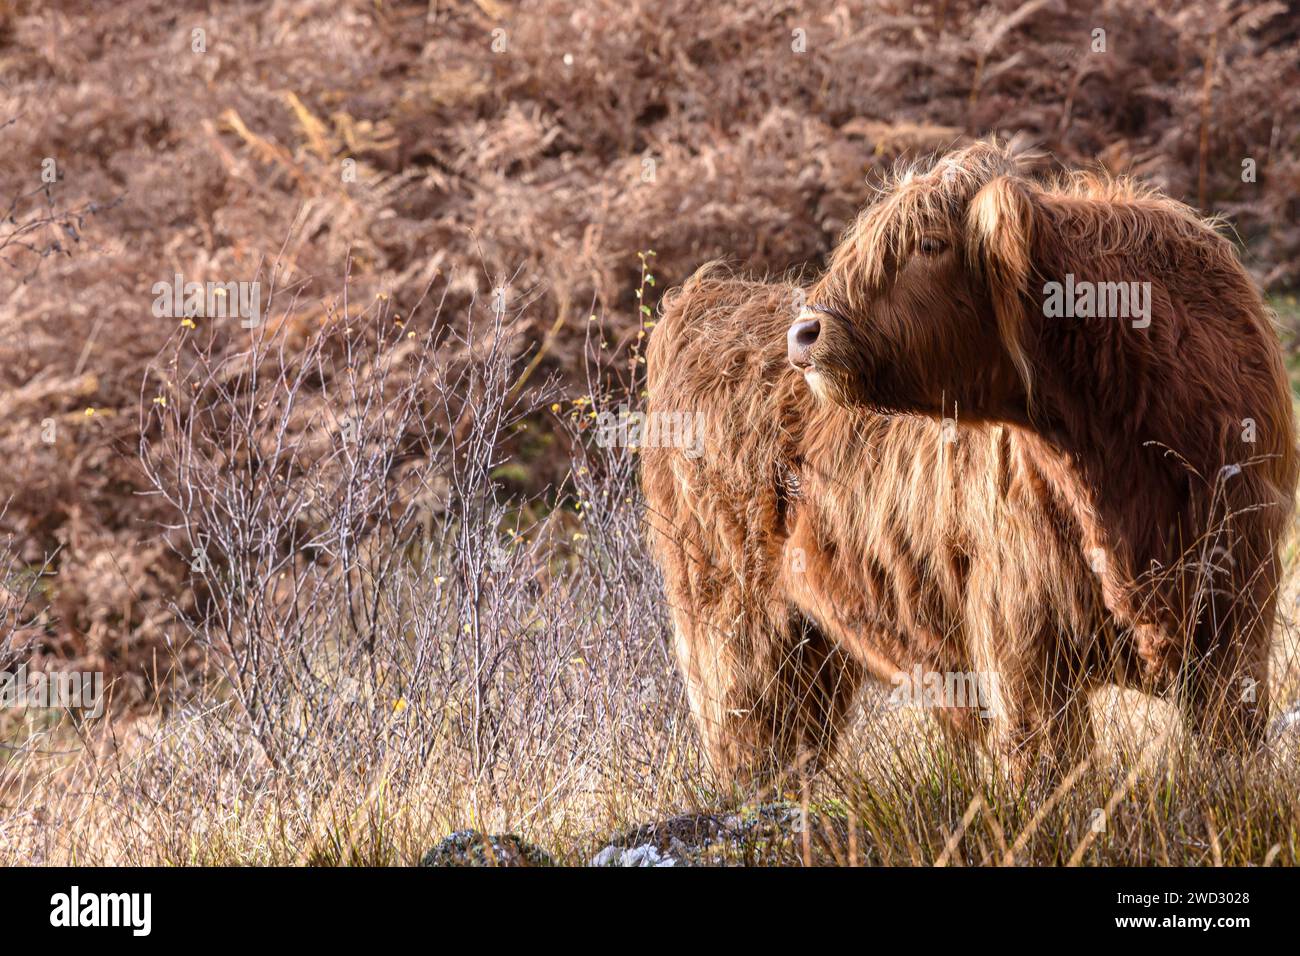 Highland cow Bos taurus taurus, standing on edge of hillside in grasses looking to the right, sunlit, Cairngorm National park, Scotland, October, Stock Photo